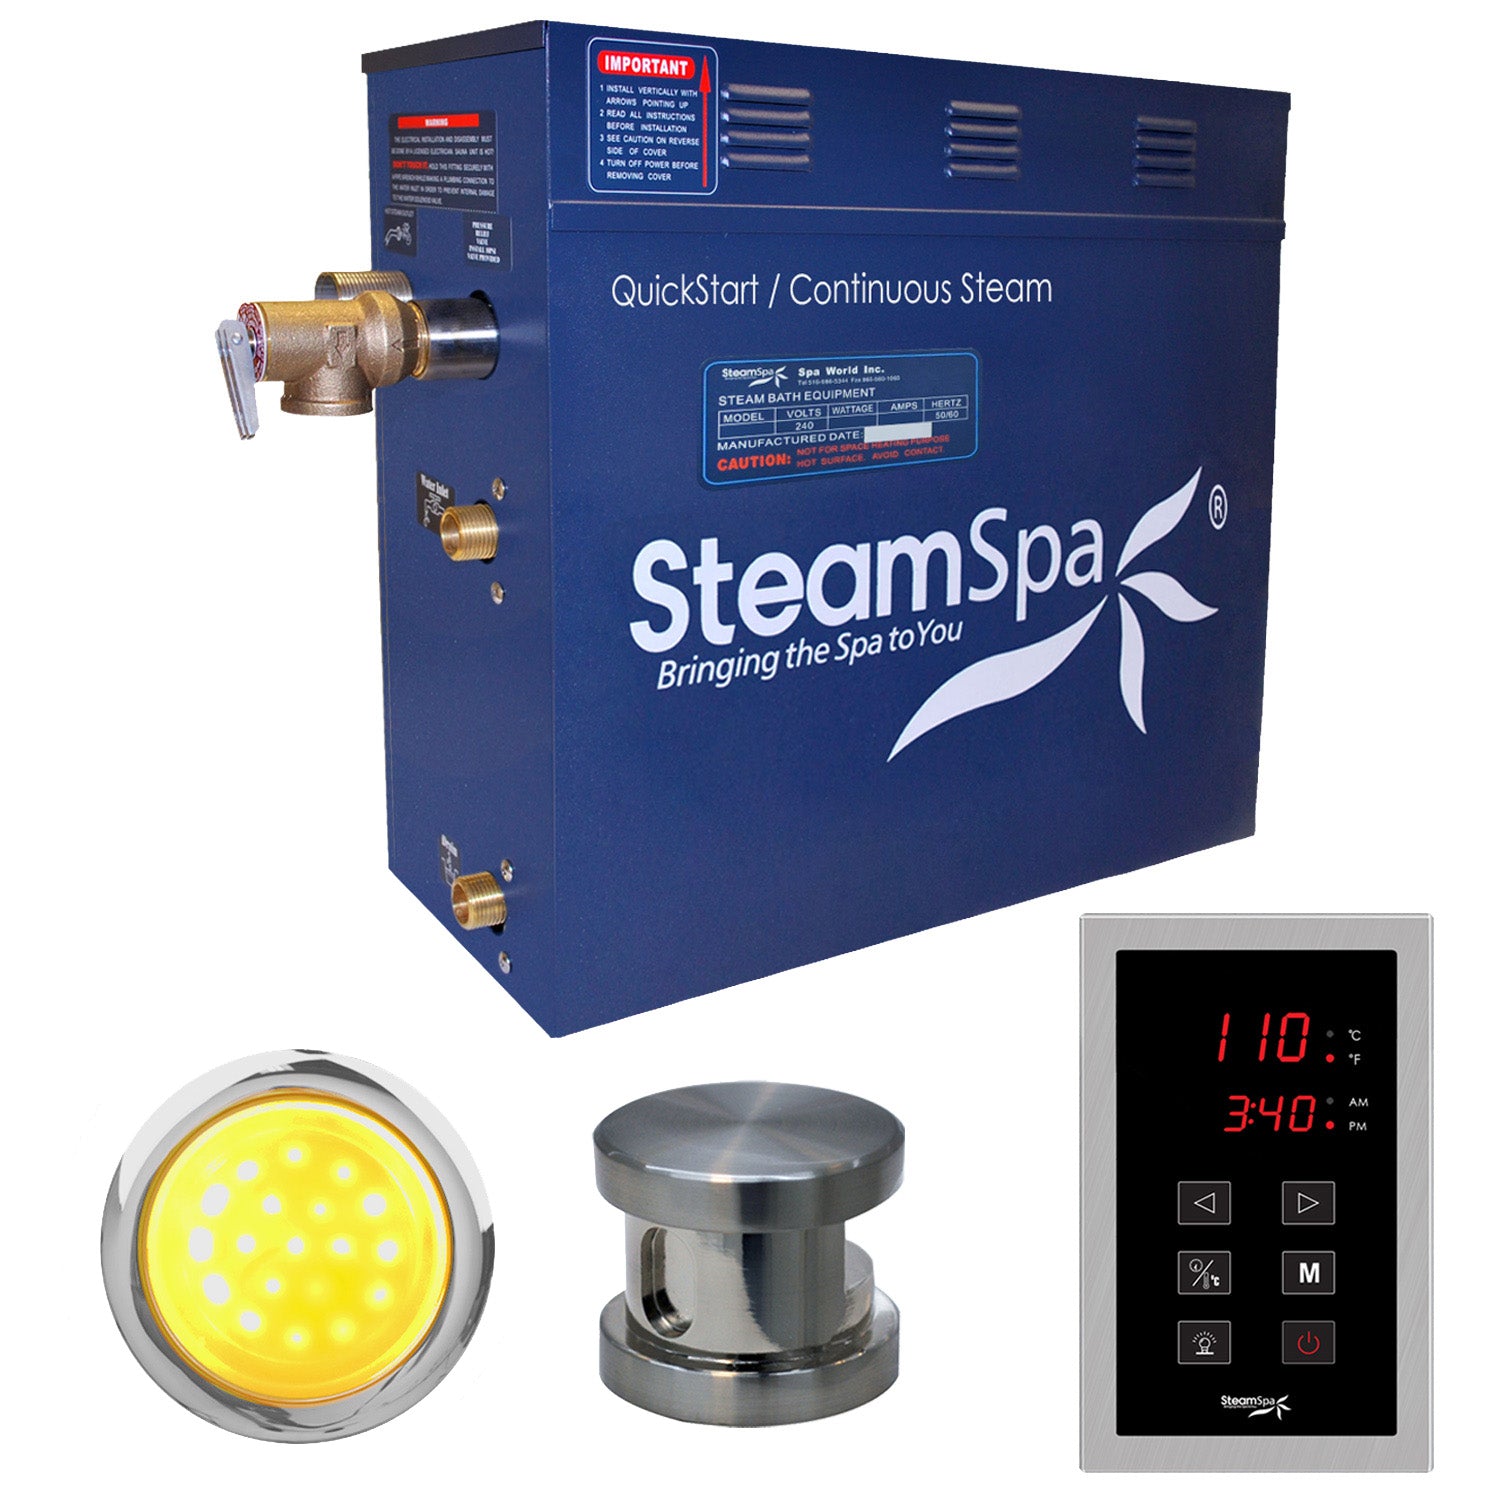 SteamSpa Indulgence 4.5 KW QuickStart Acu-Steam Bath Generator Package - 12 in. L x 6 in. W x 2 in. H - Stainless Steel - Polished Brushed Nickel - Includes a 4.5kW QuickStart Acu-Steam Bath Generator, Touch Pad Control Panel, Steam head, Chroma therapy three color mode LED light - INT450 - Vital Hydrotherapy